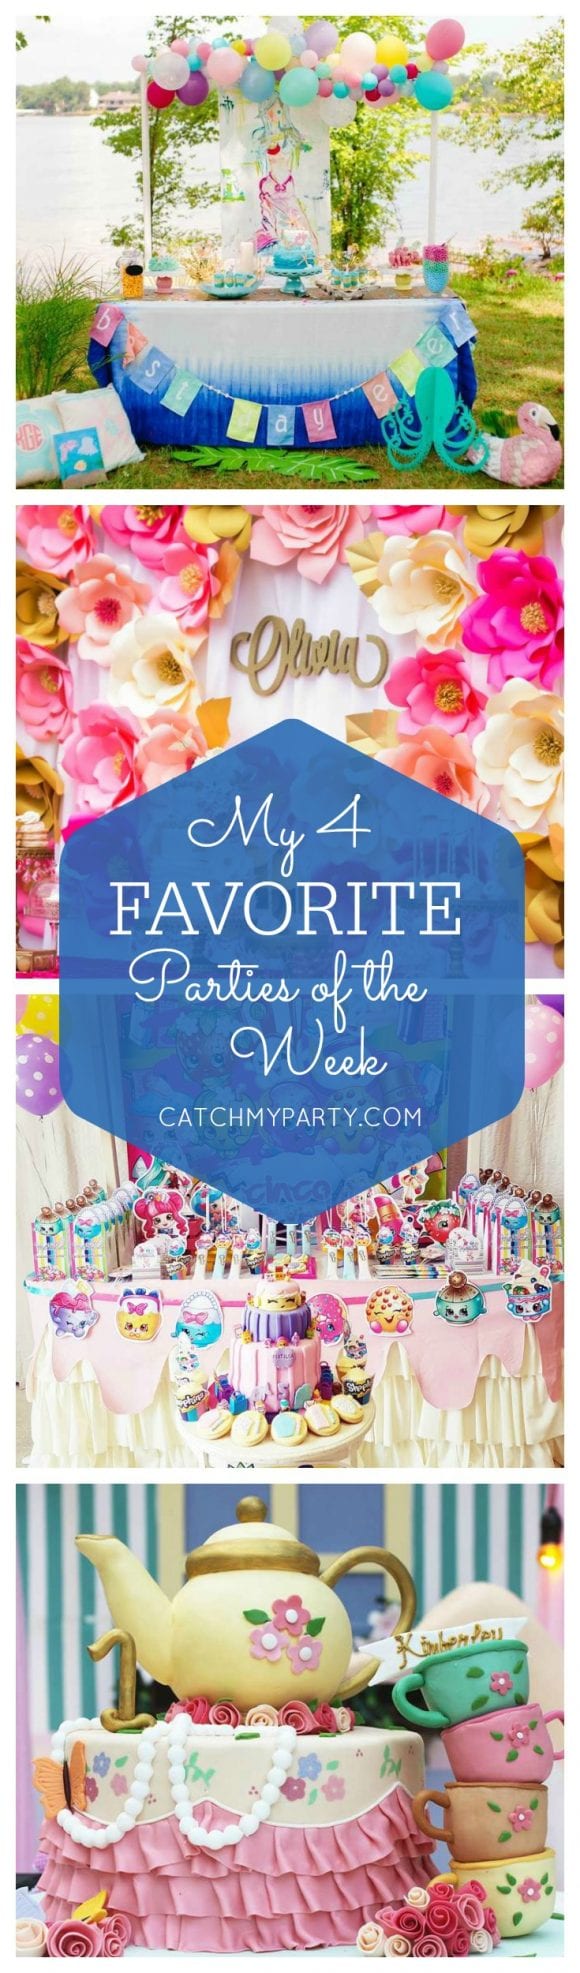 My favorite parties are a pastel mermaid birthday party, a tea party birthday, a shopkins birthday party and a birthday garden party | Catchmyparty.com